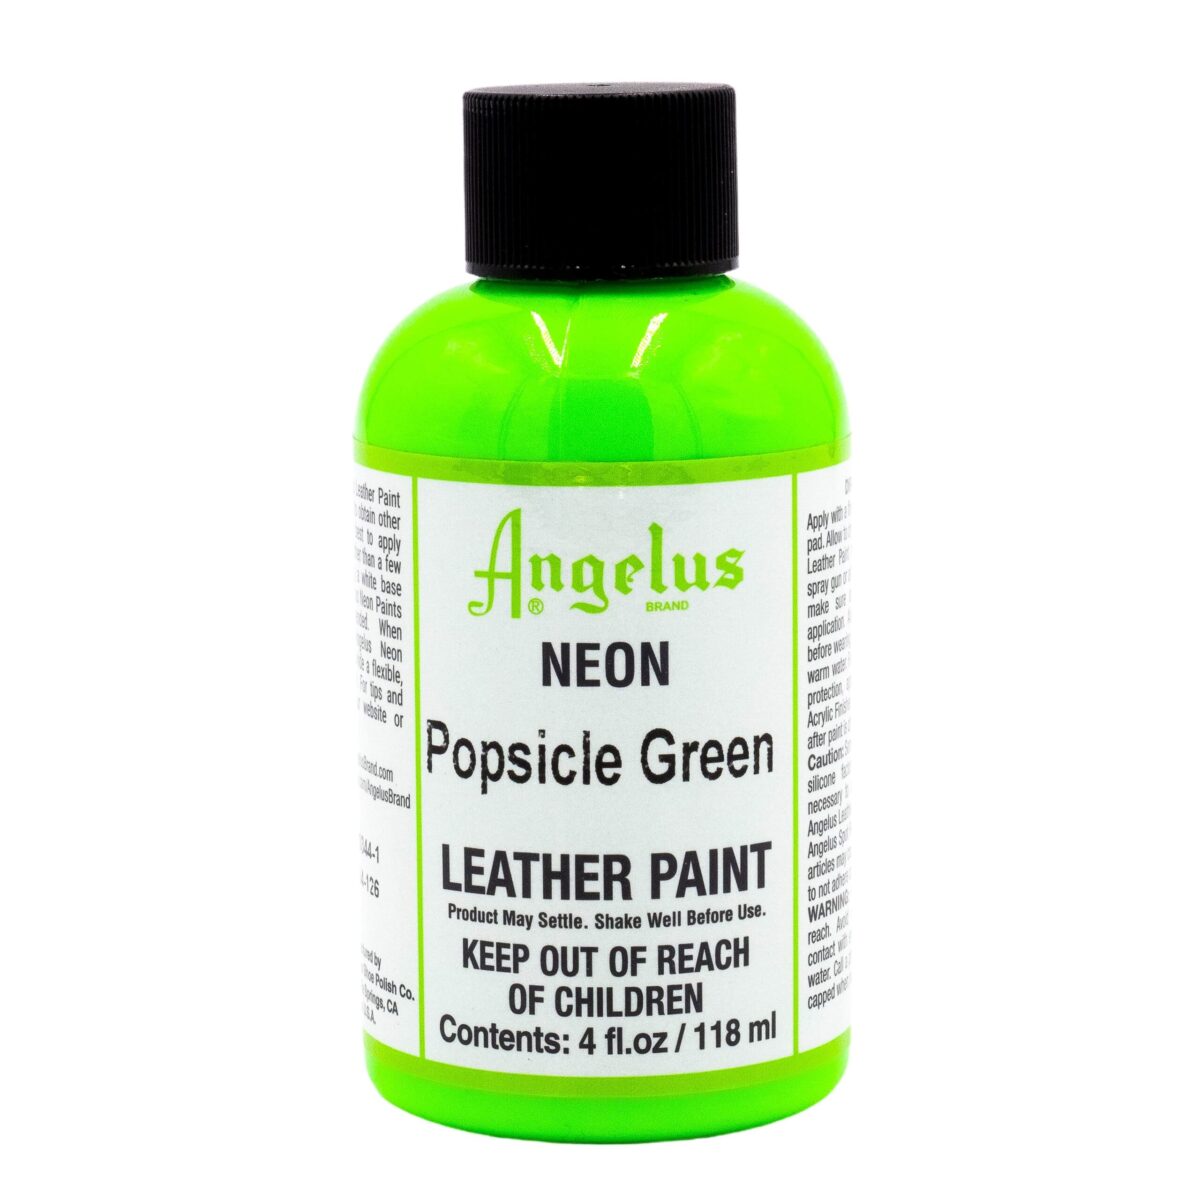 Angelus Leather Paint Neon Popsicle Green 118ml